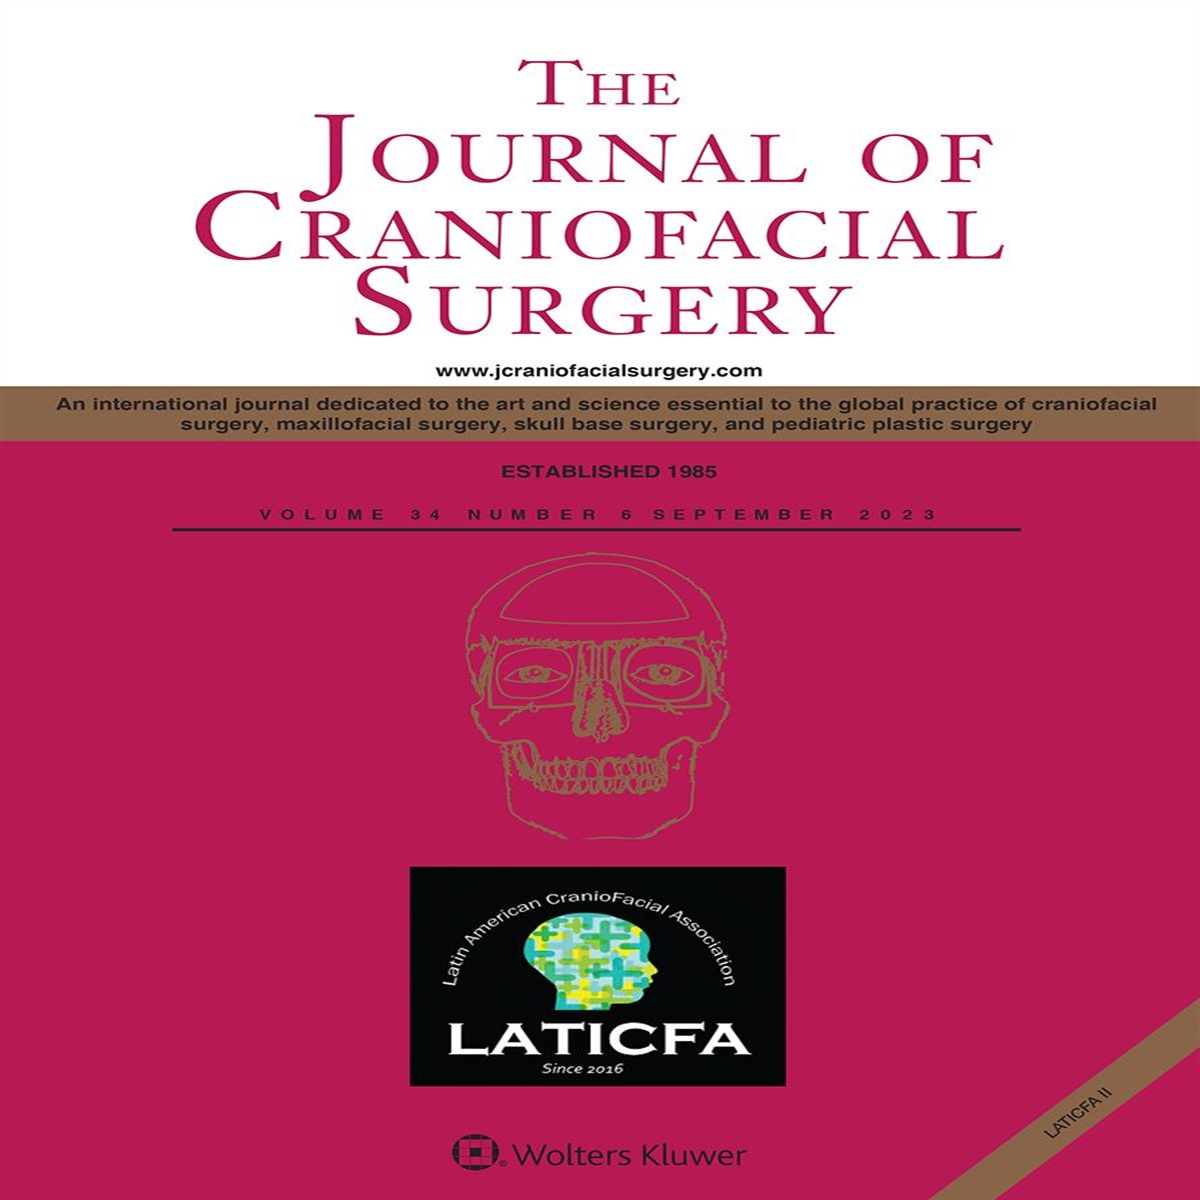 Clinical Characterization of Congenital Anophthalmic and Microphthalmic Cavities in Inidviduals With Craniofacial Anomalies